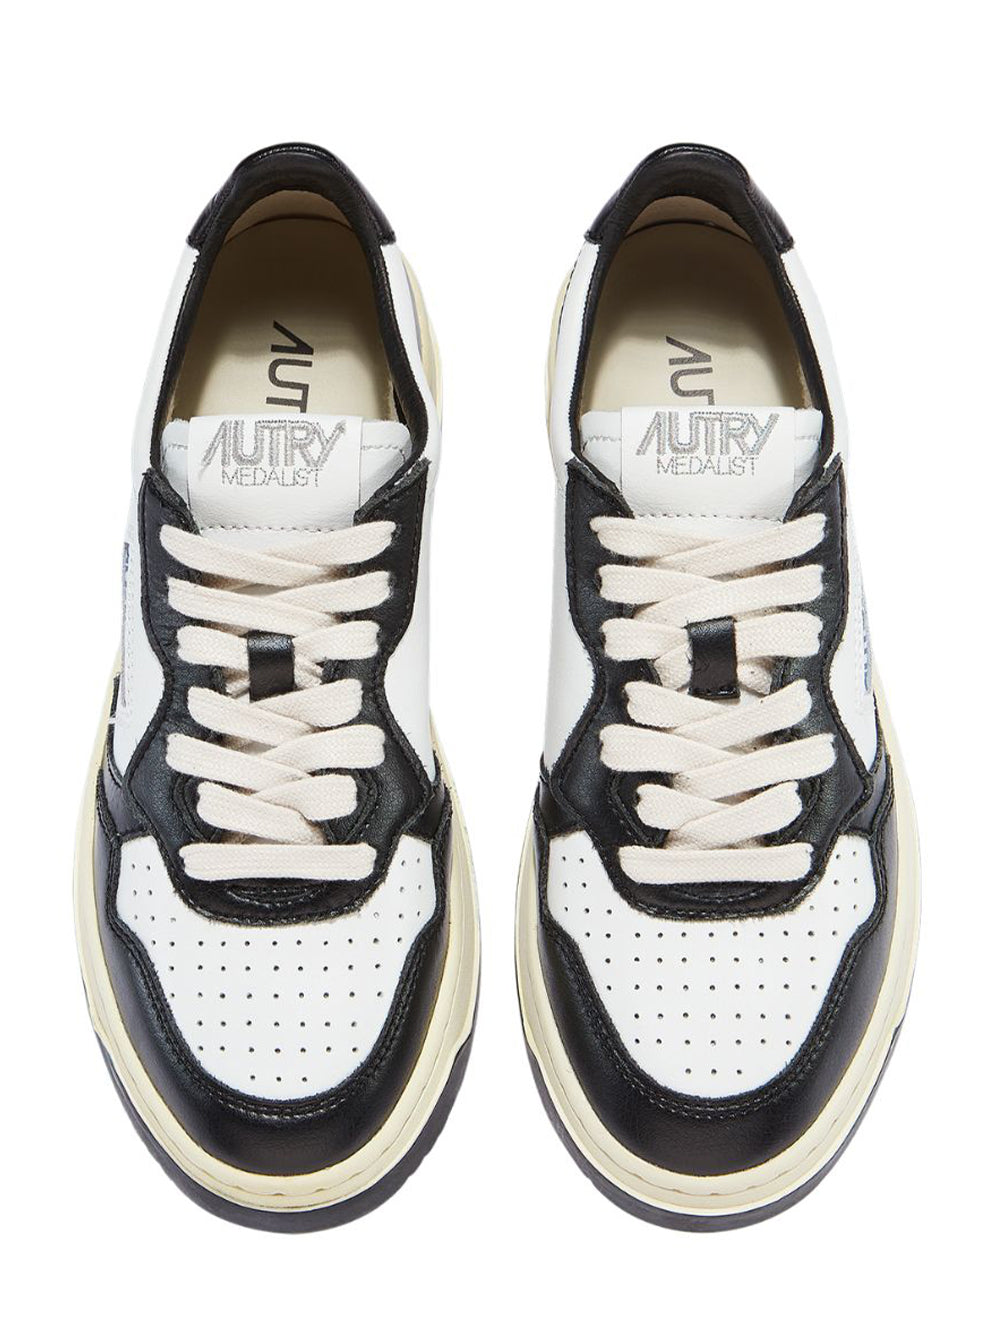 Medalist Low Sneakers In Two-Tone Leather Color (White And Black) (Women)